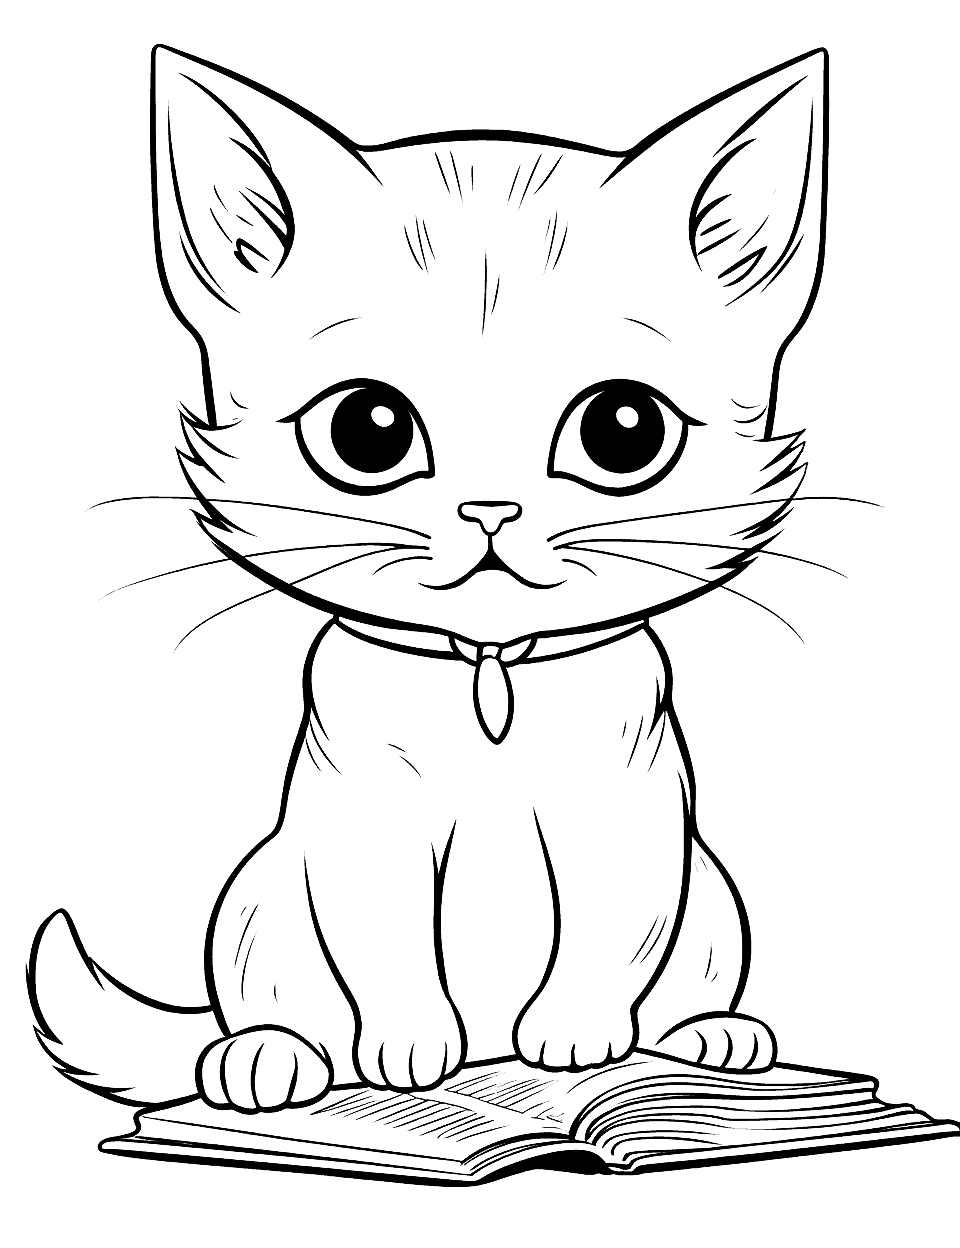 Chibi-Style Cat Reading a Book Coloring Page - A chibi-style cat reading a large book with a look of concentration on its face.